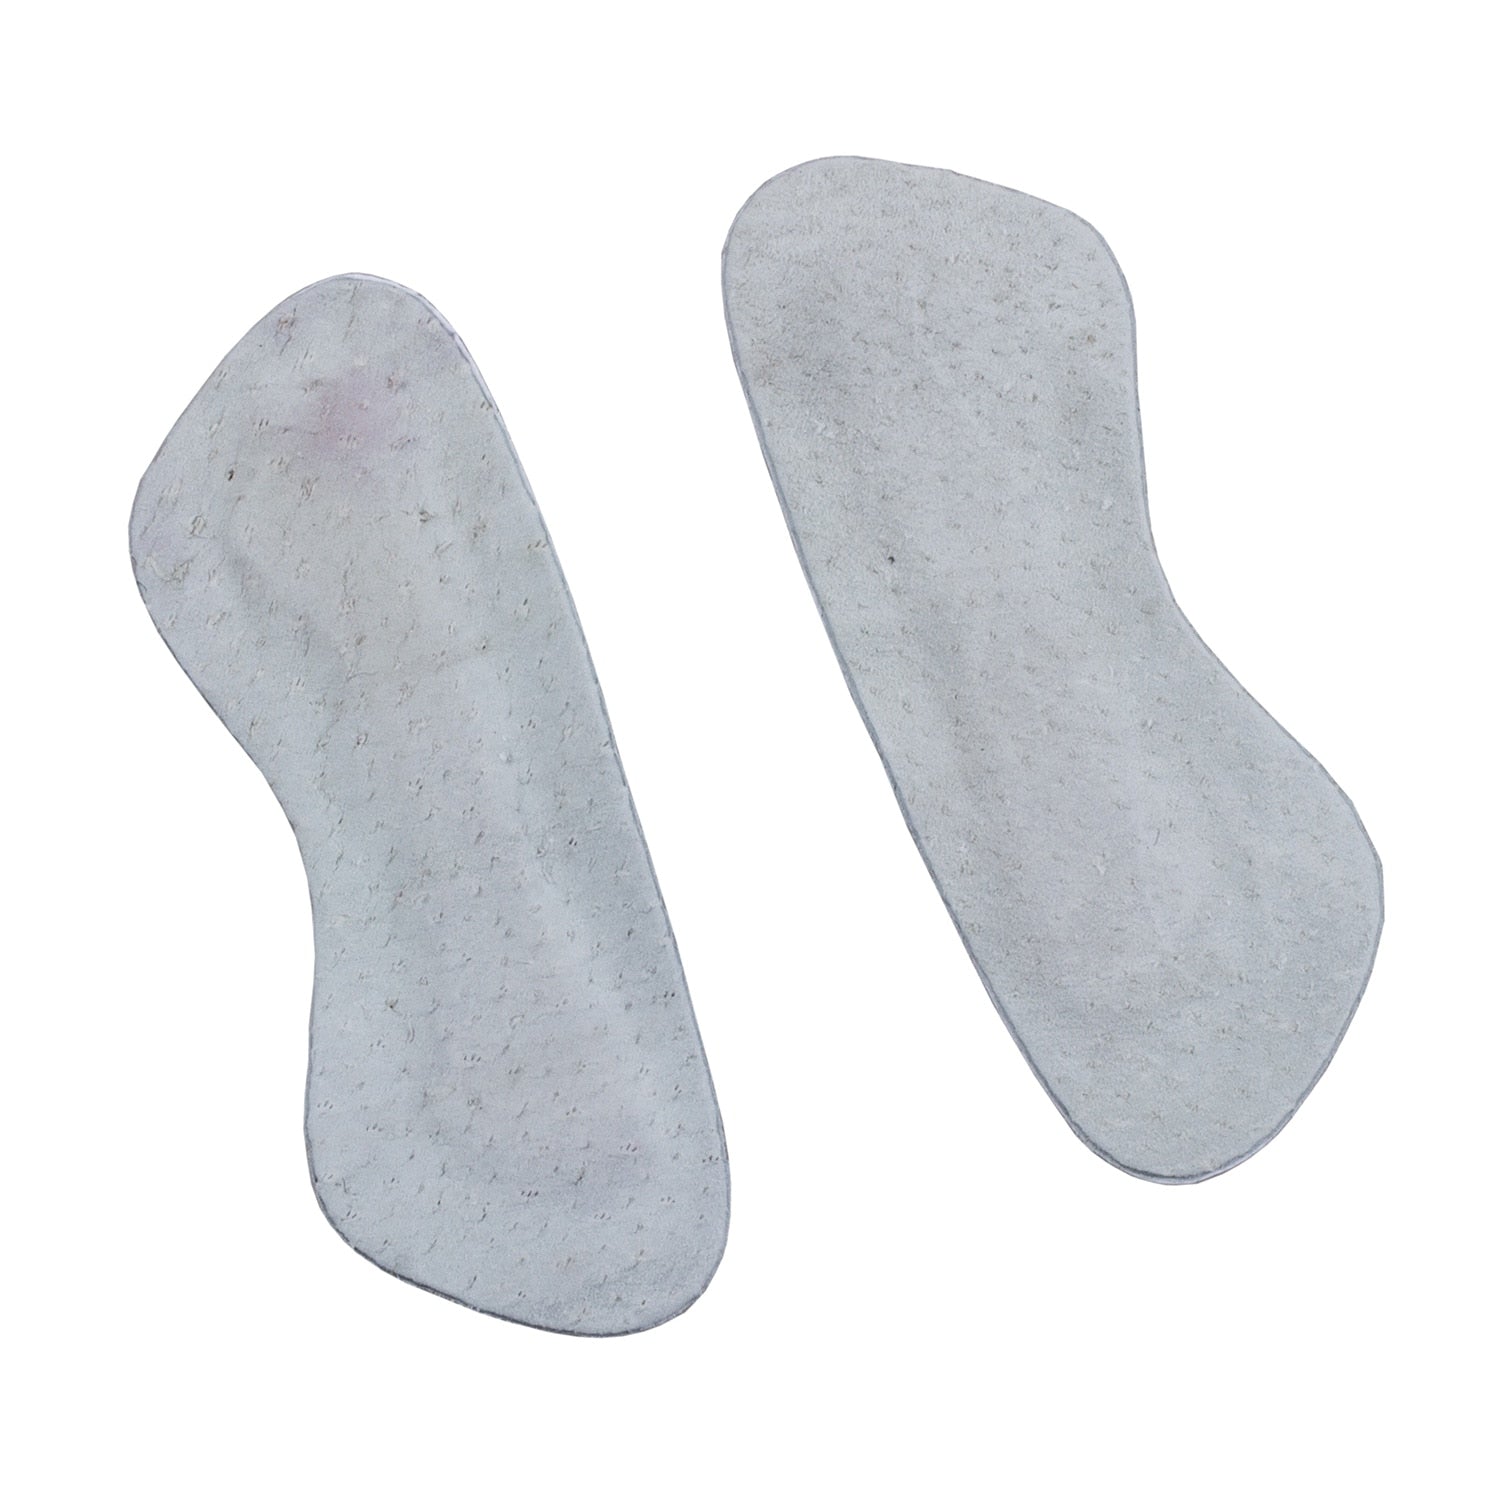 1 Pair Inserts Insoles Pads Cushion Liner Protector Foot Care For Women Inserts Sticky Shoe Back Heel - ebowsos